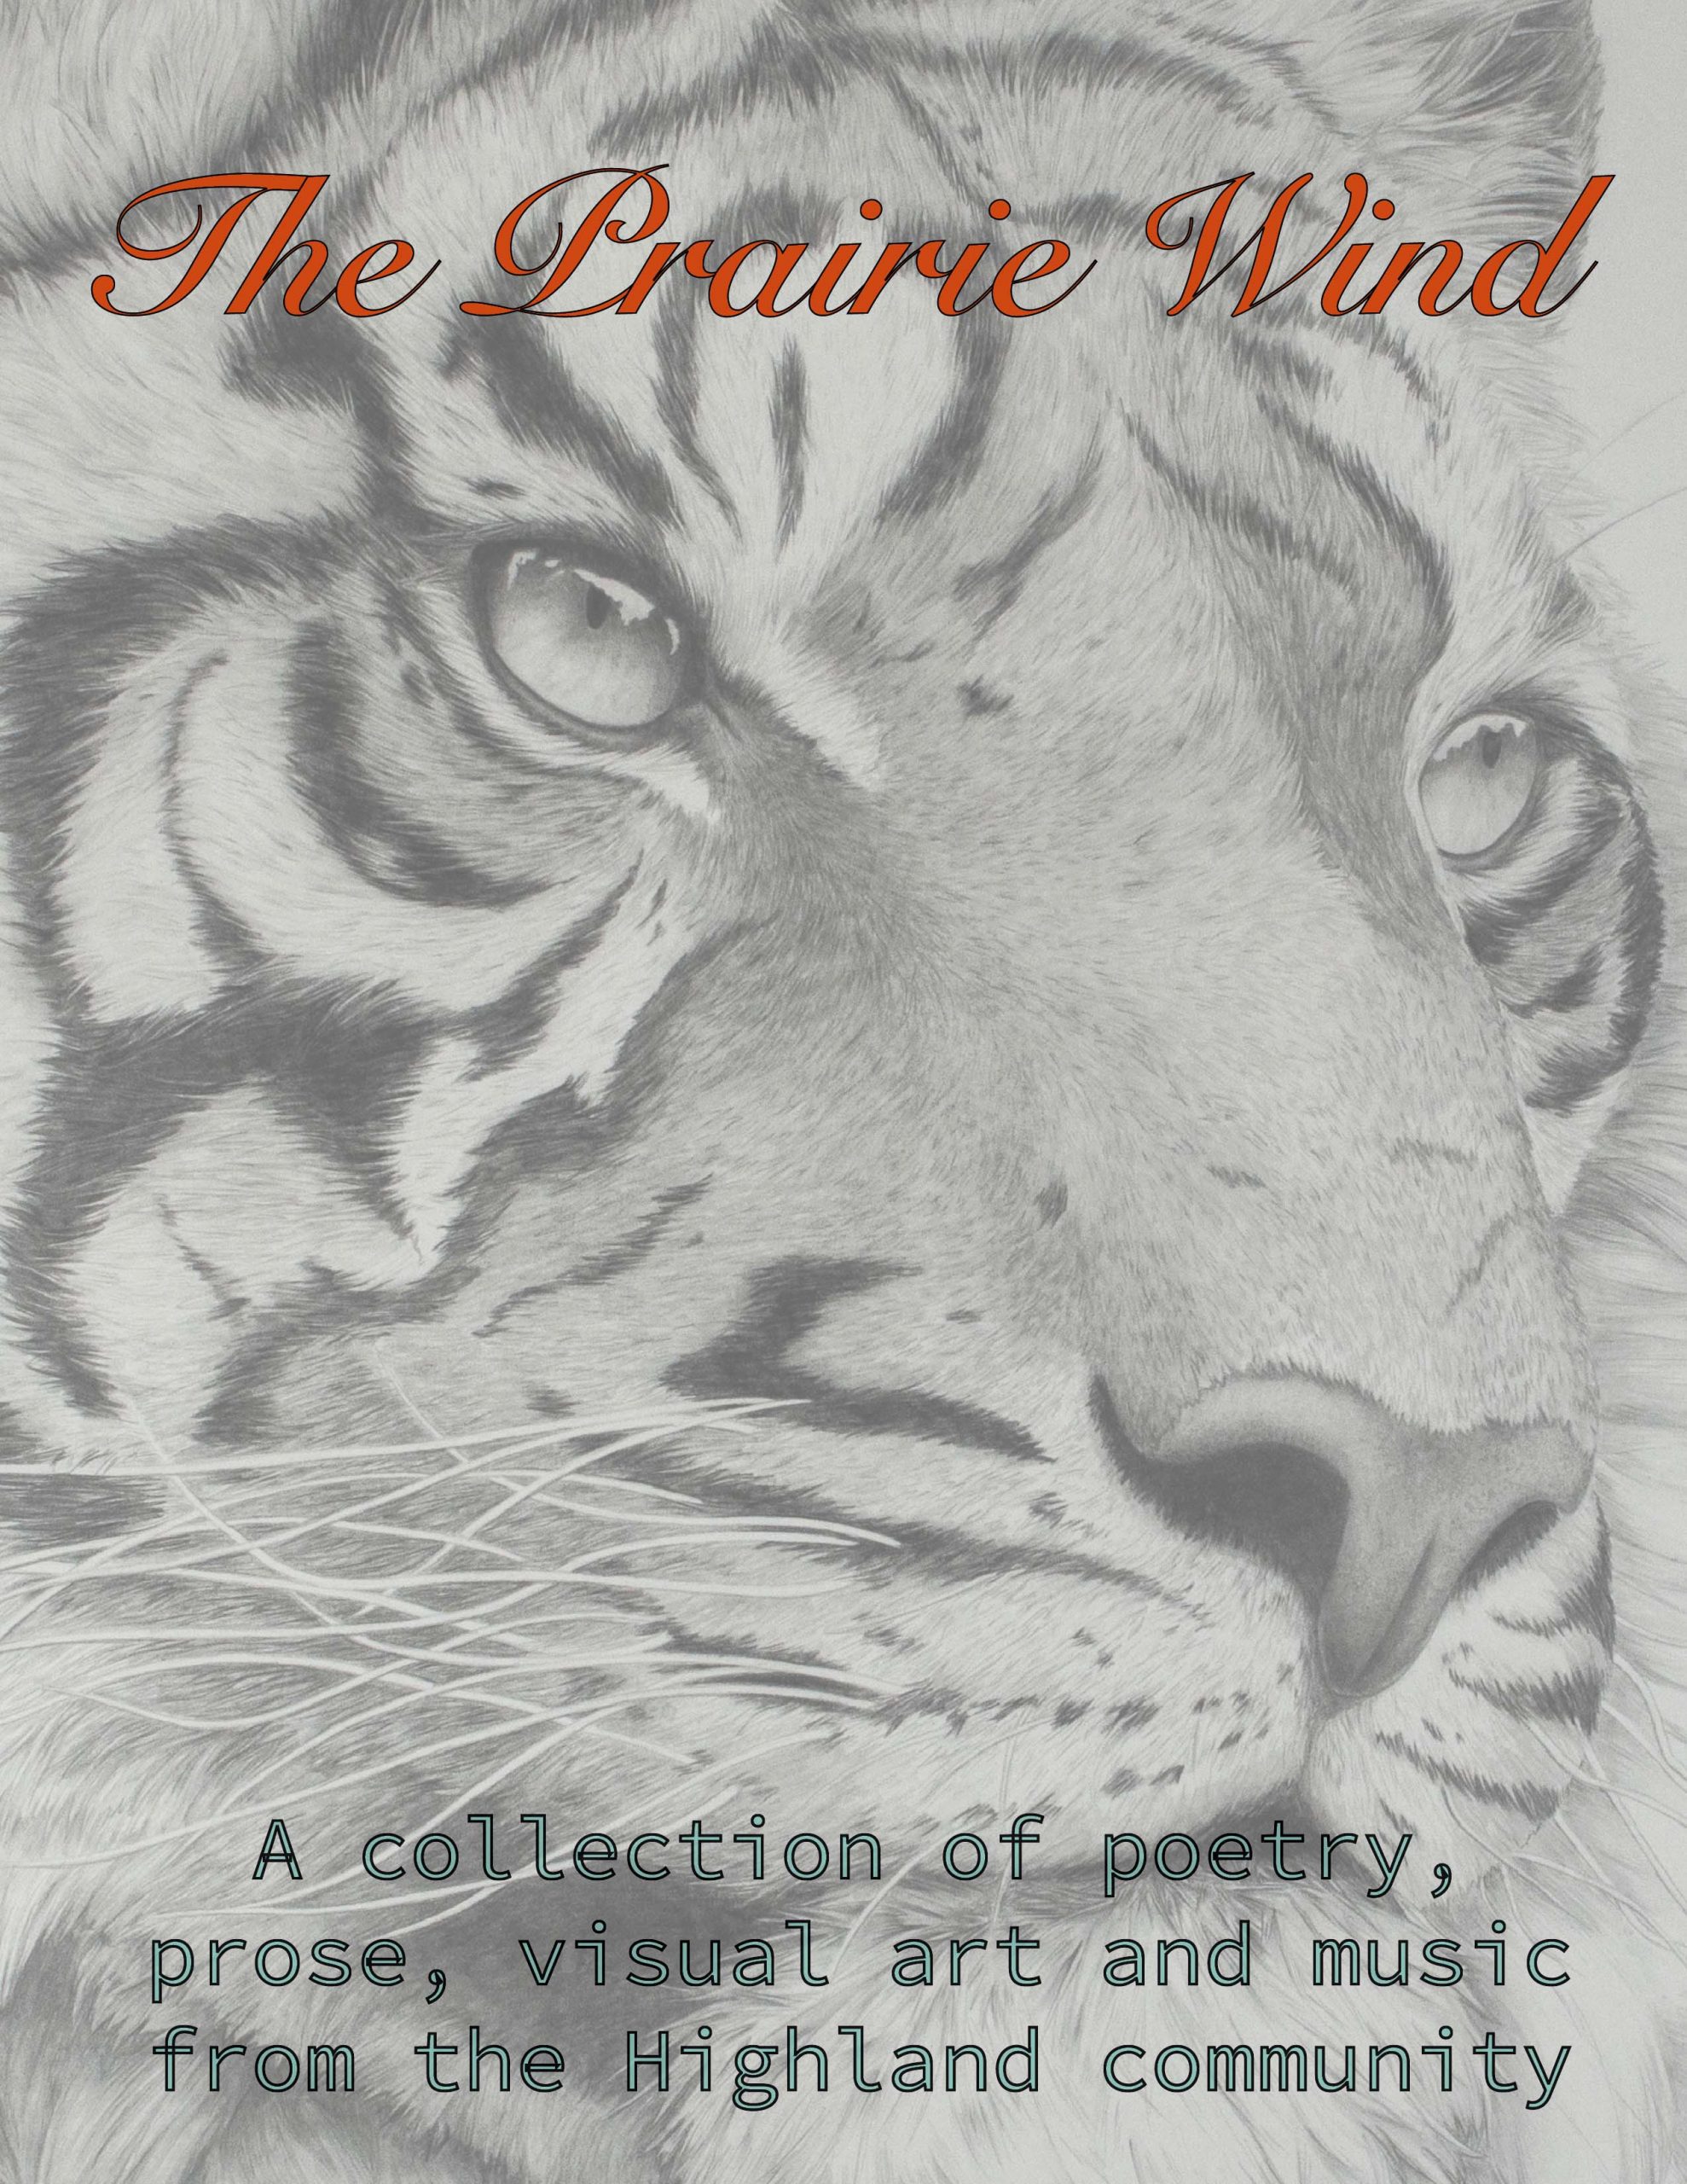 Prairie Wind 2020 cover featuring a lion drawing